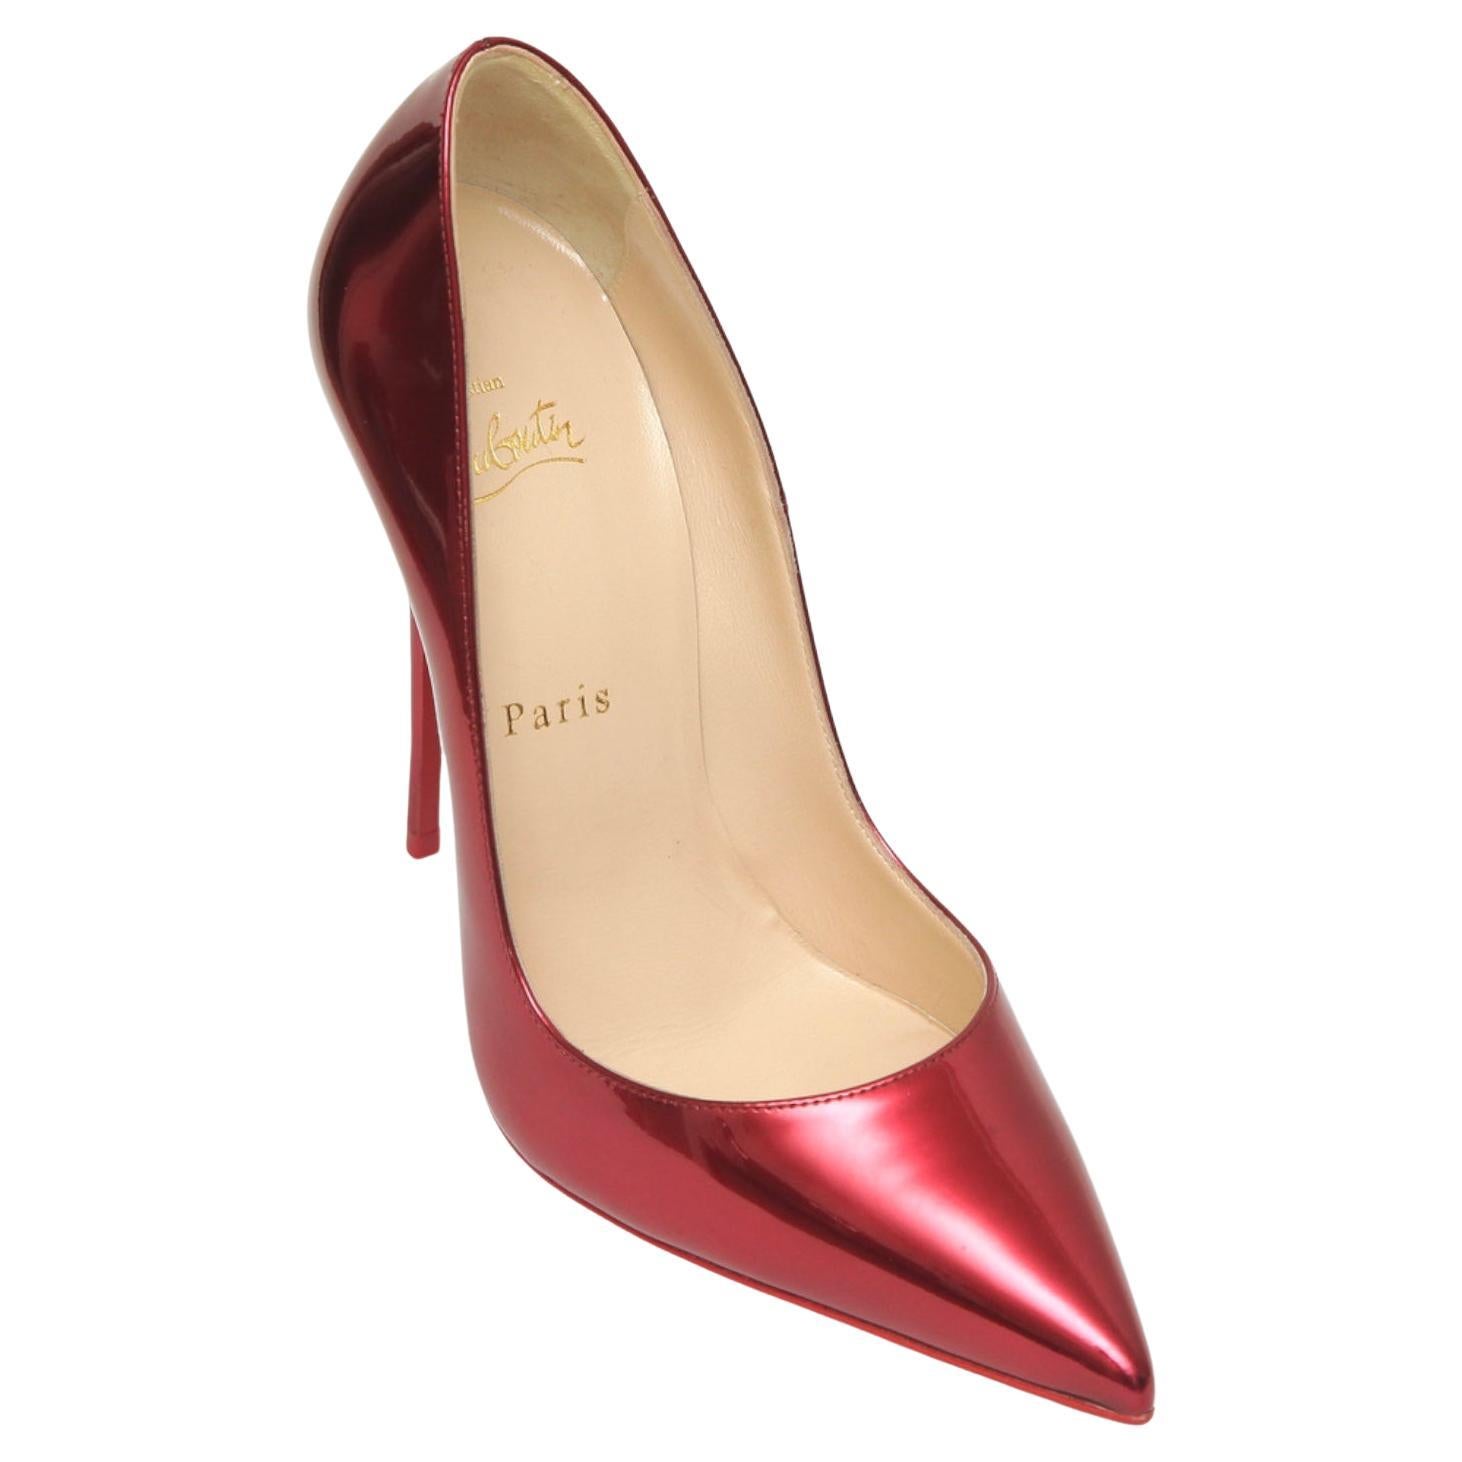 CHRISTIAN LOUBOUTIN So Kate 120 Red Patent Leather Pump Pointed Toe 38